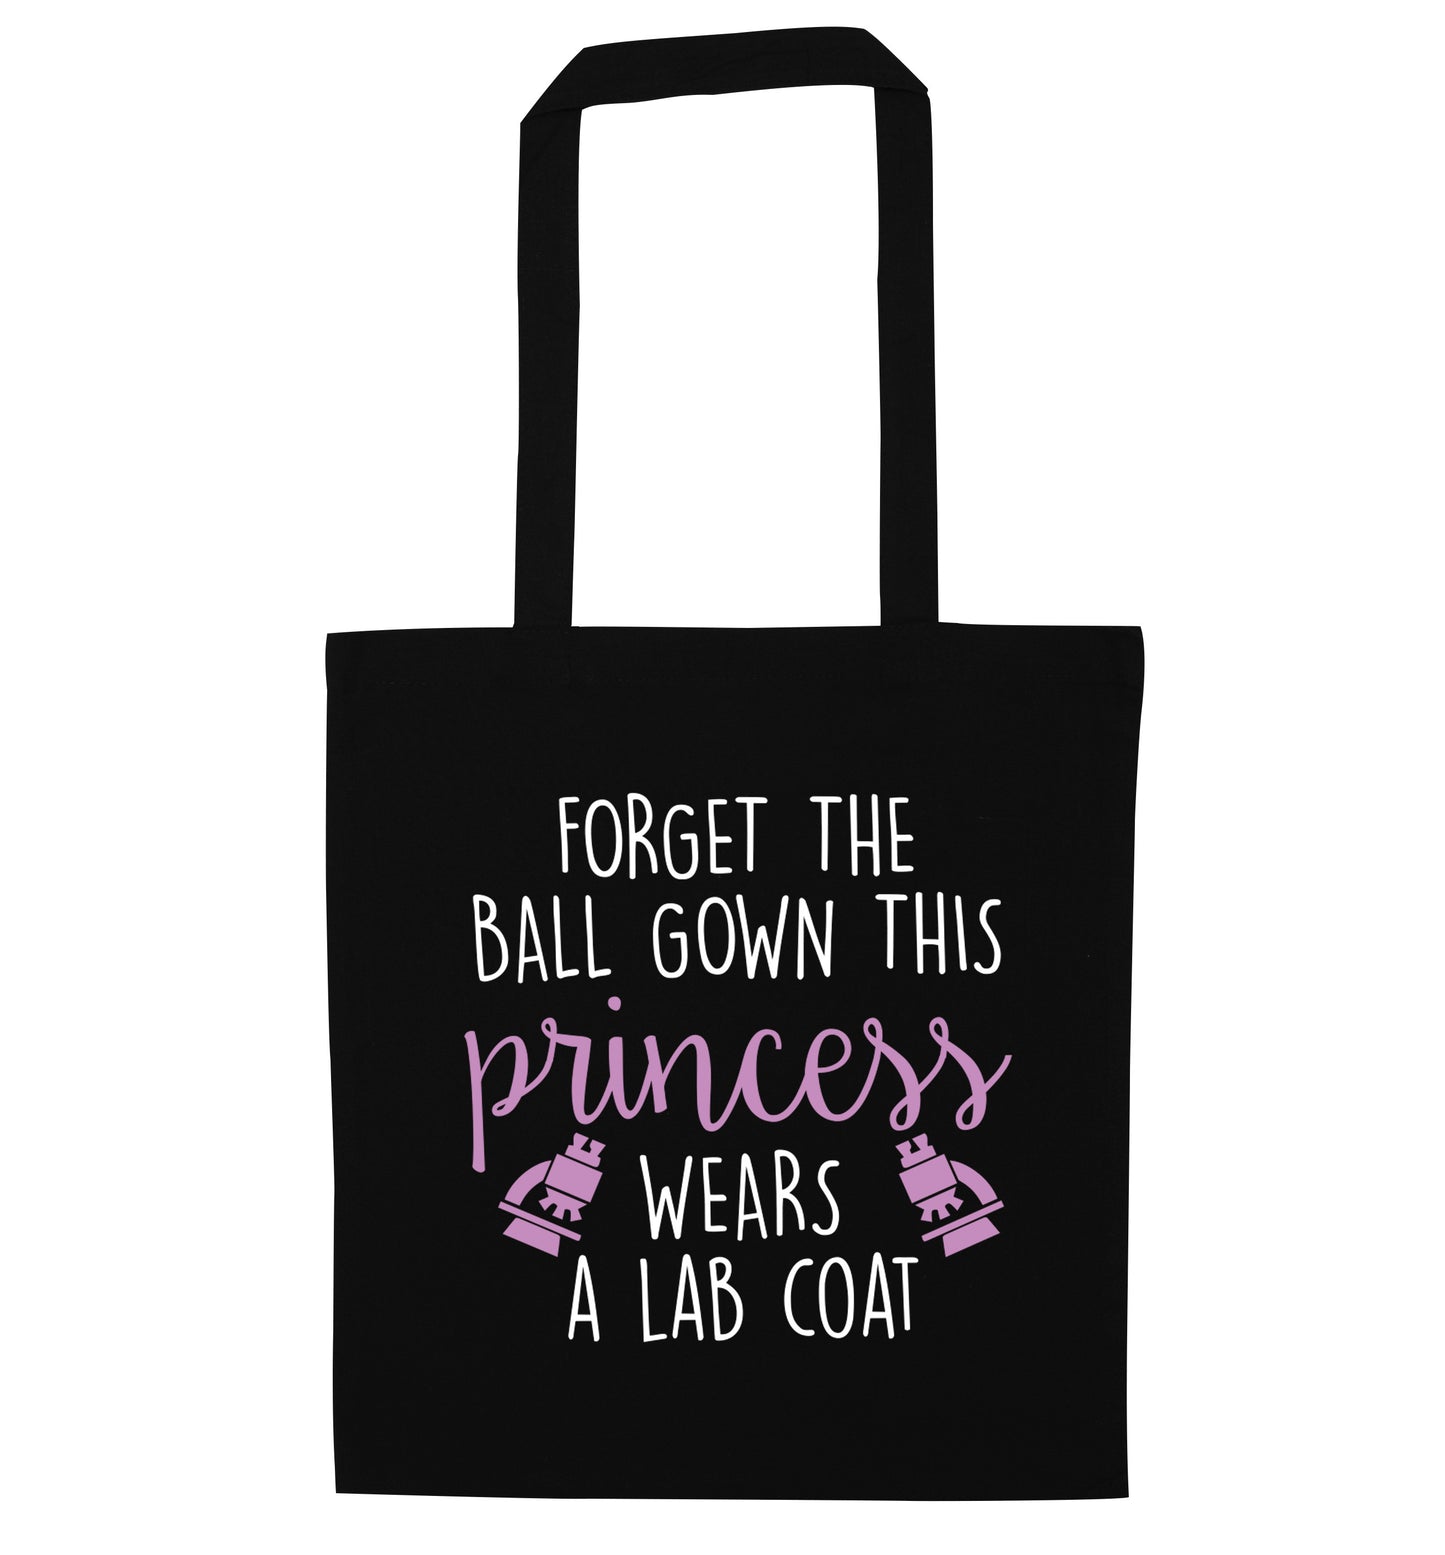 Forget the ball gown this princess wears a lab coat black tote bag